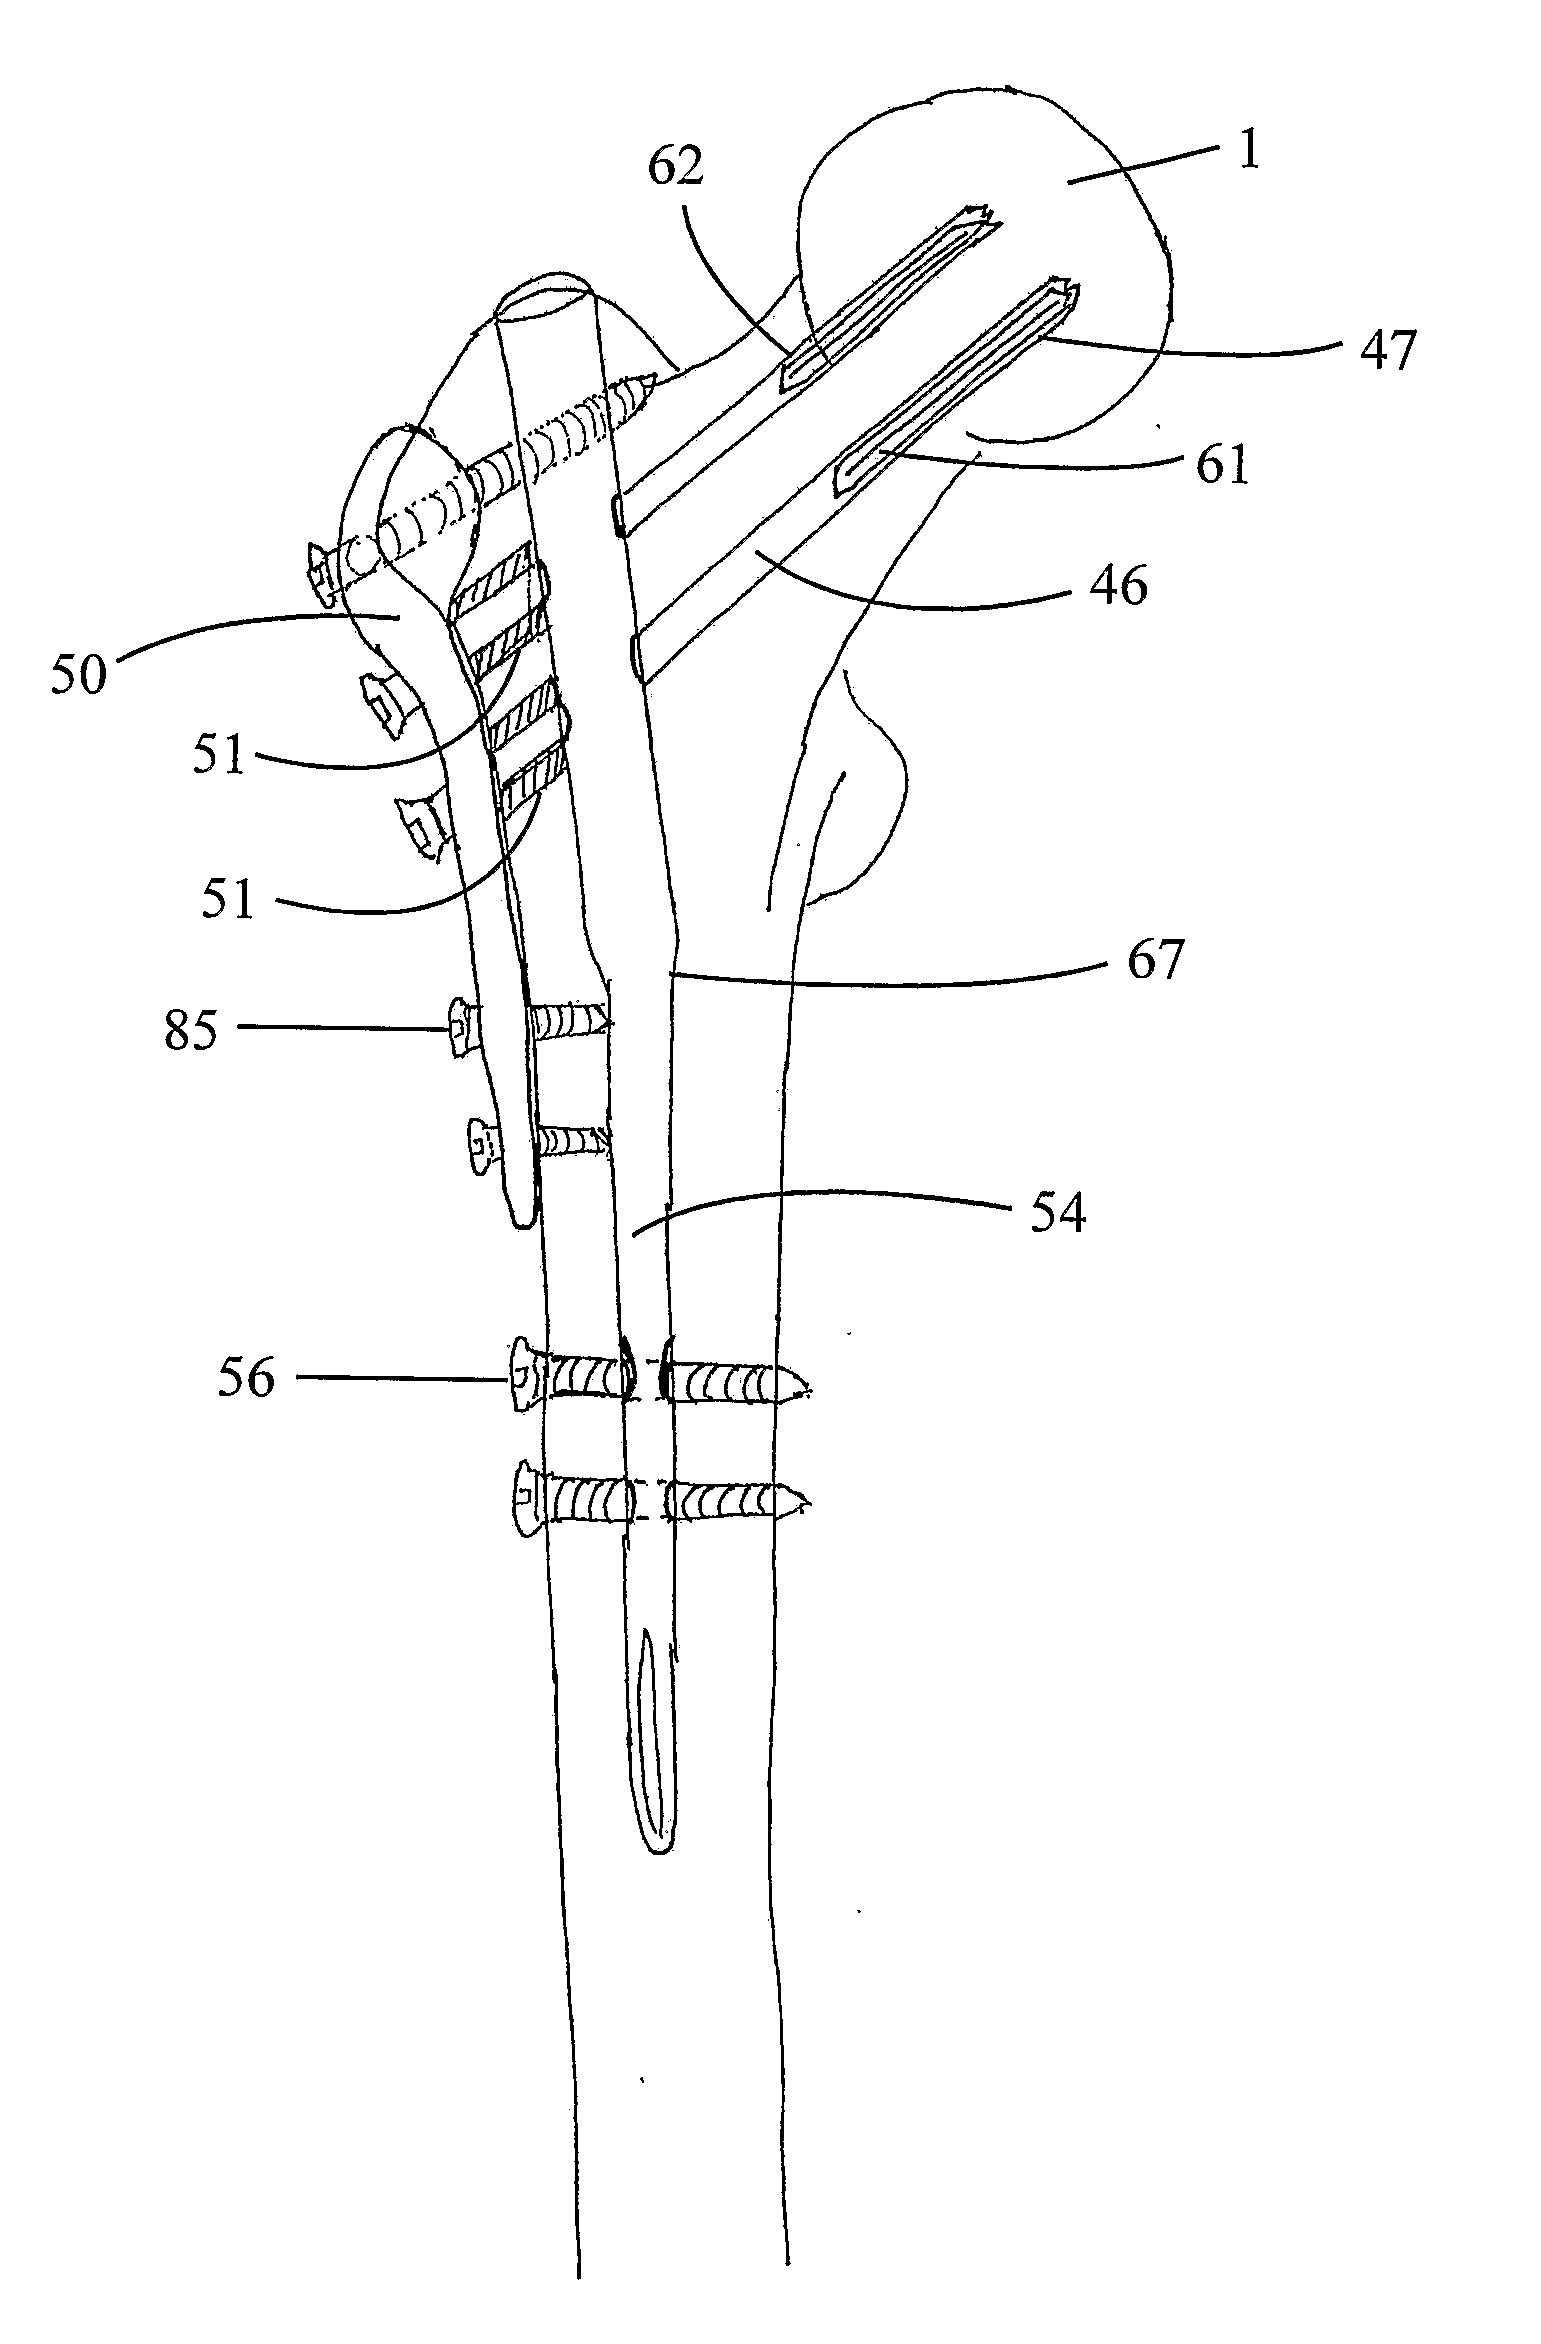 Implant assembly for proximal femoral fracture